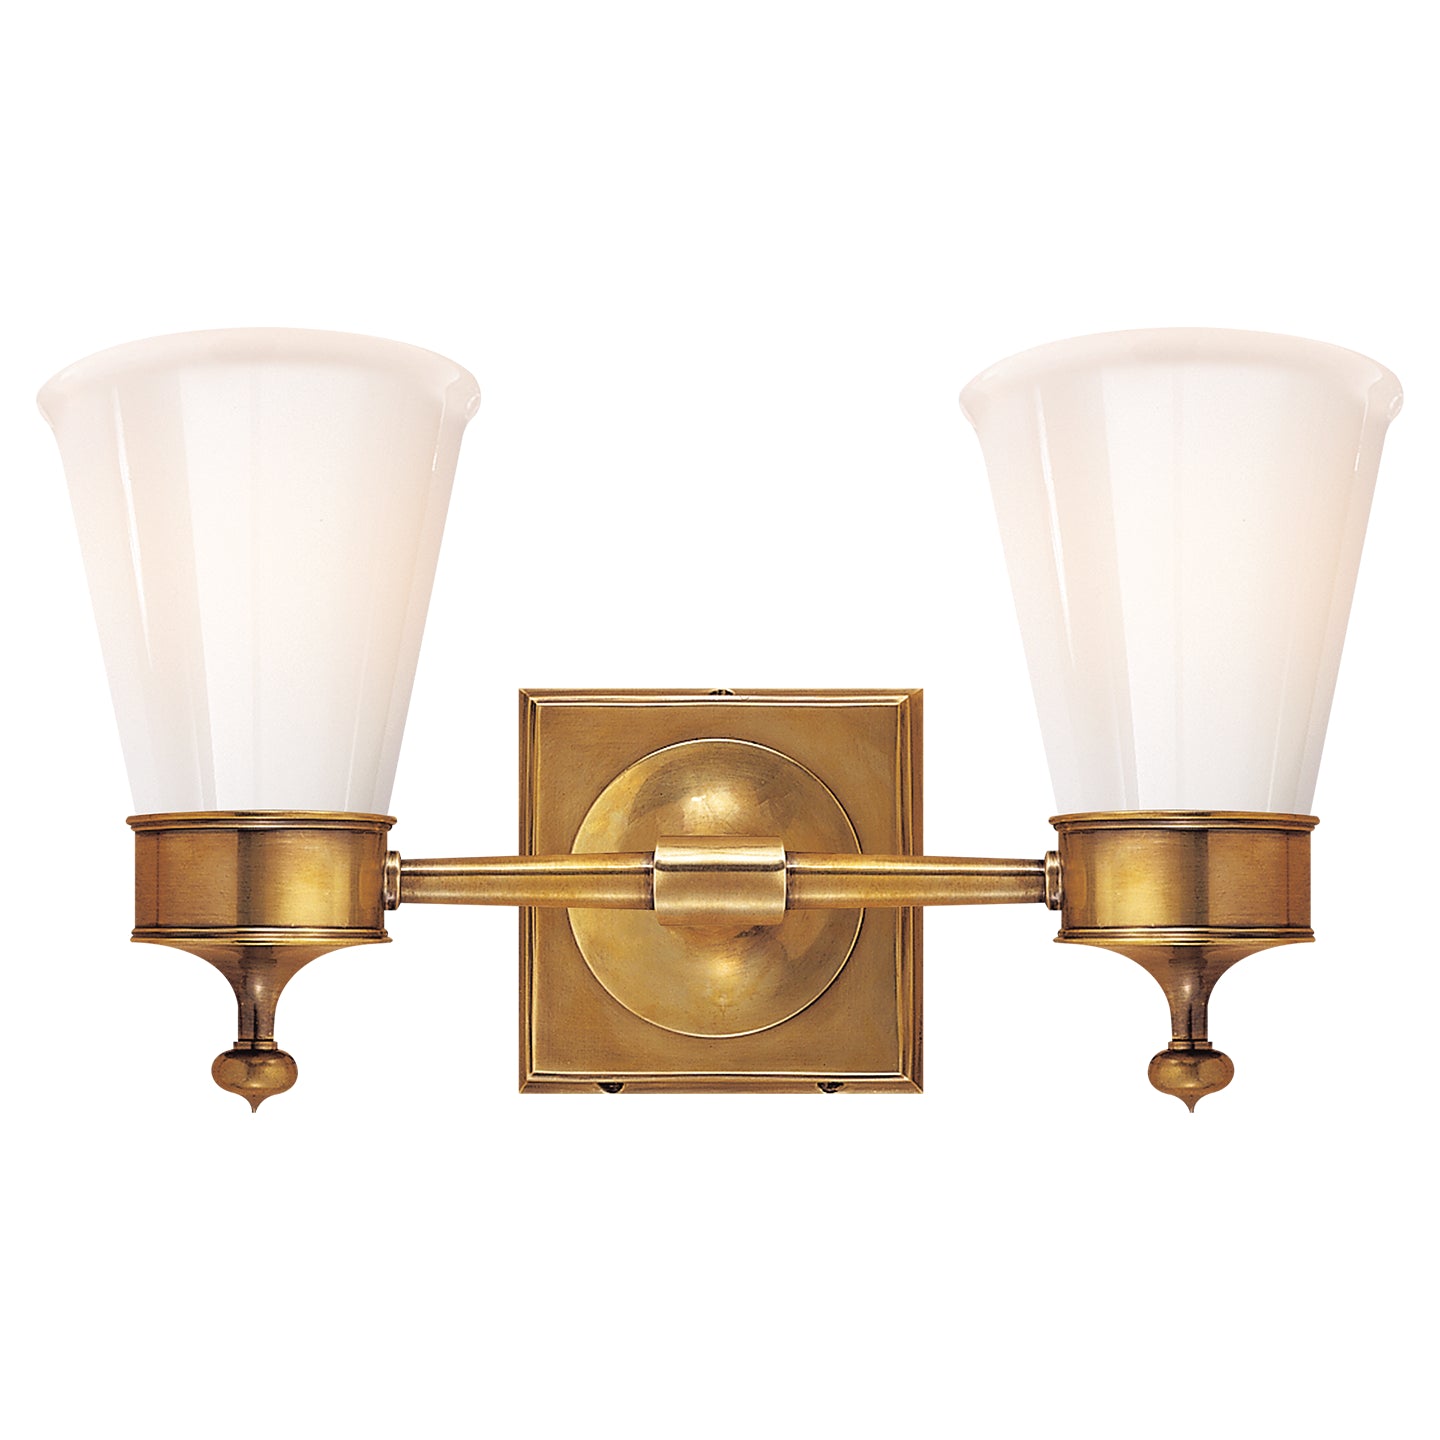 Load image into Gallery viewer, Visual Comfort Signature - SS 2002HAB-WG - Two Light Wall Sconce - Siena - Hand-Rubbed Antique Brass
